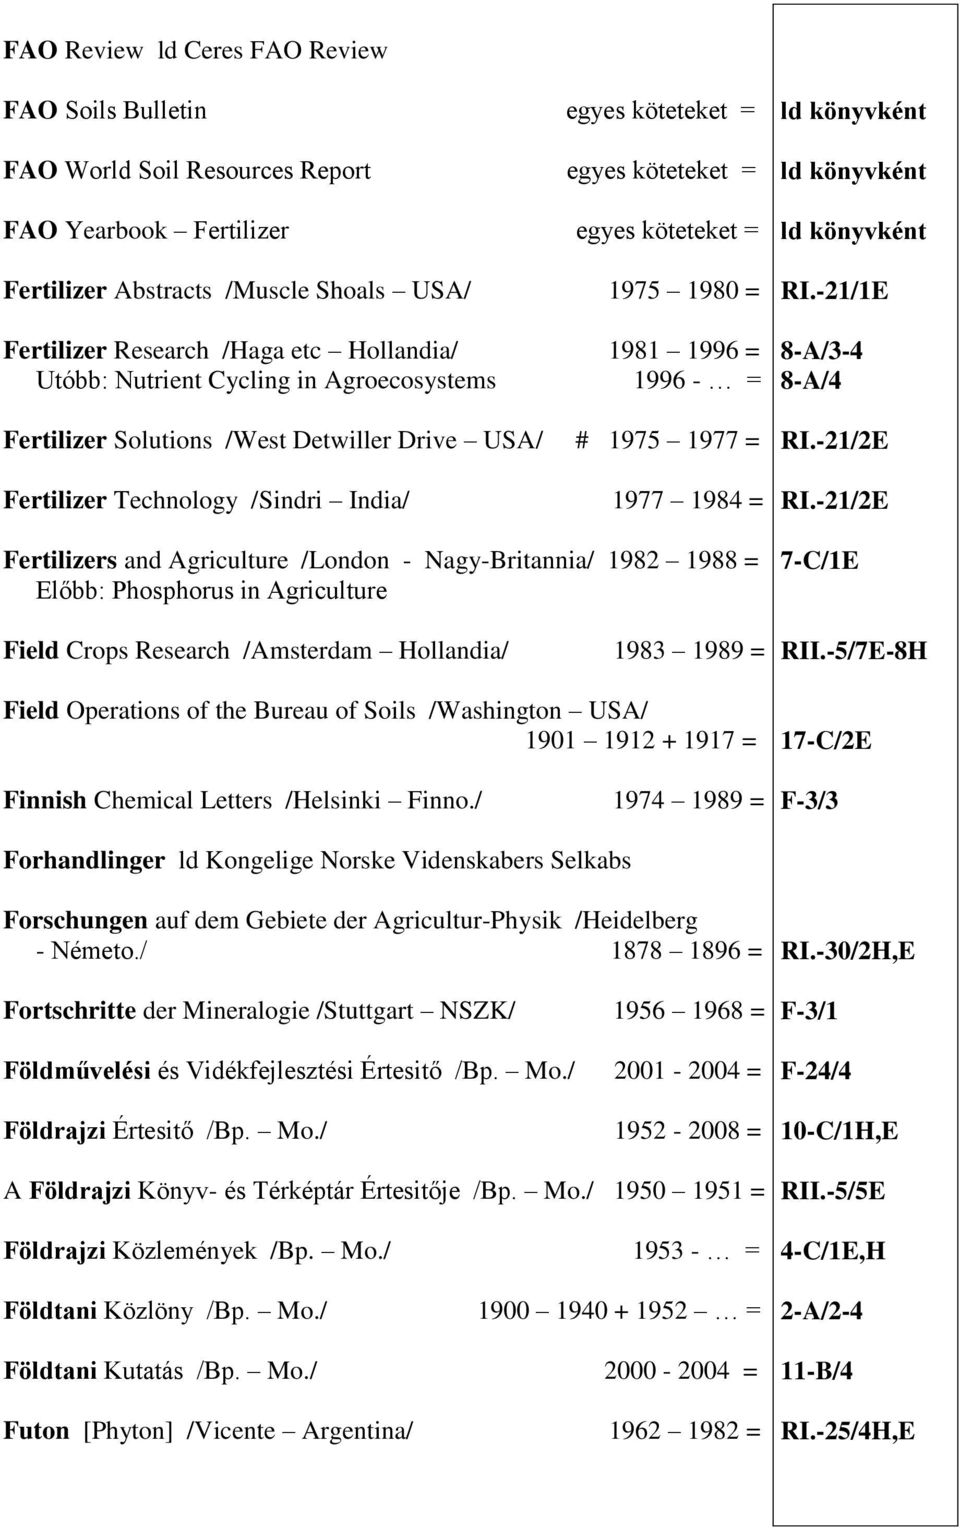 Technology /Sindri India/ 1977 1984 = Fertilizers and Agriculture /London - Nagy-Britannia/ 1982 1988 = Előbb: Phosphorus in Agriculture Field Crops Research /Amsterdam Hollandia/ 1983 1989 = Field